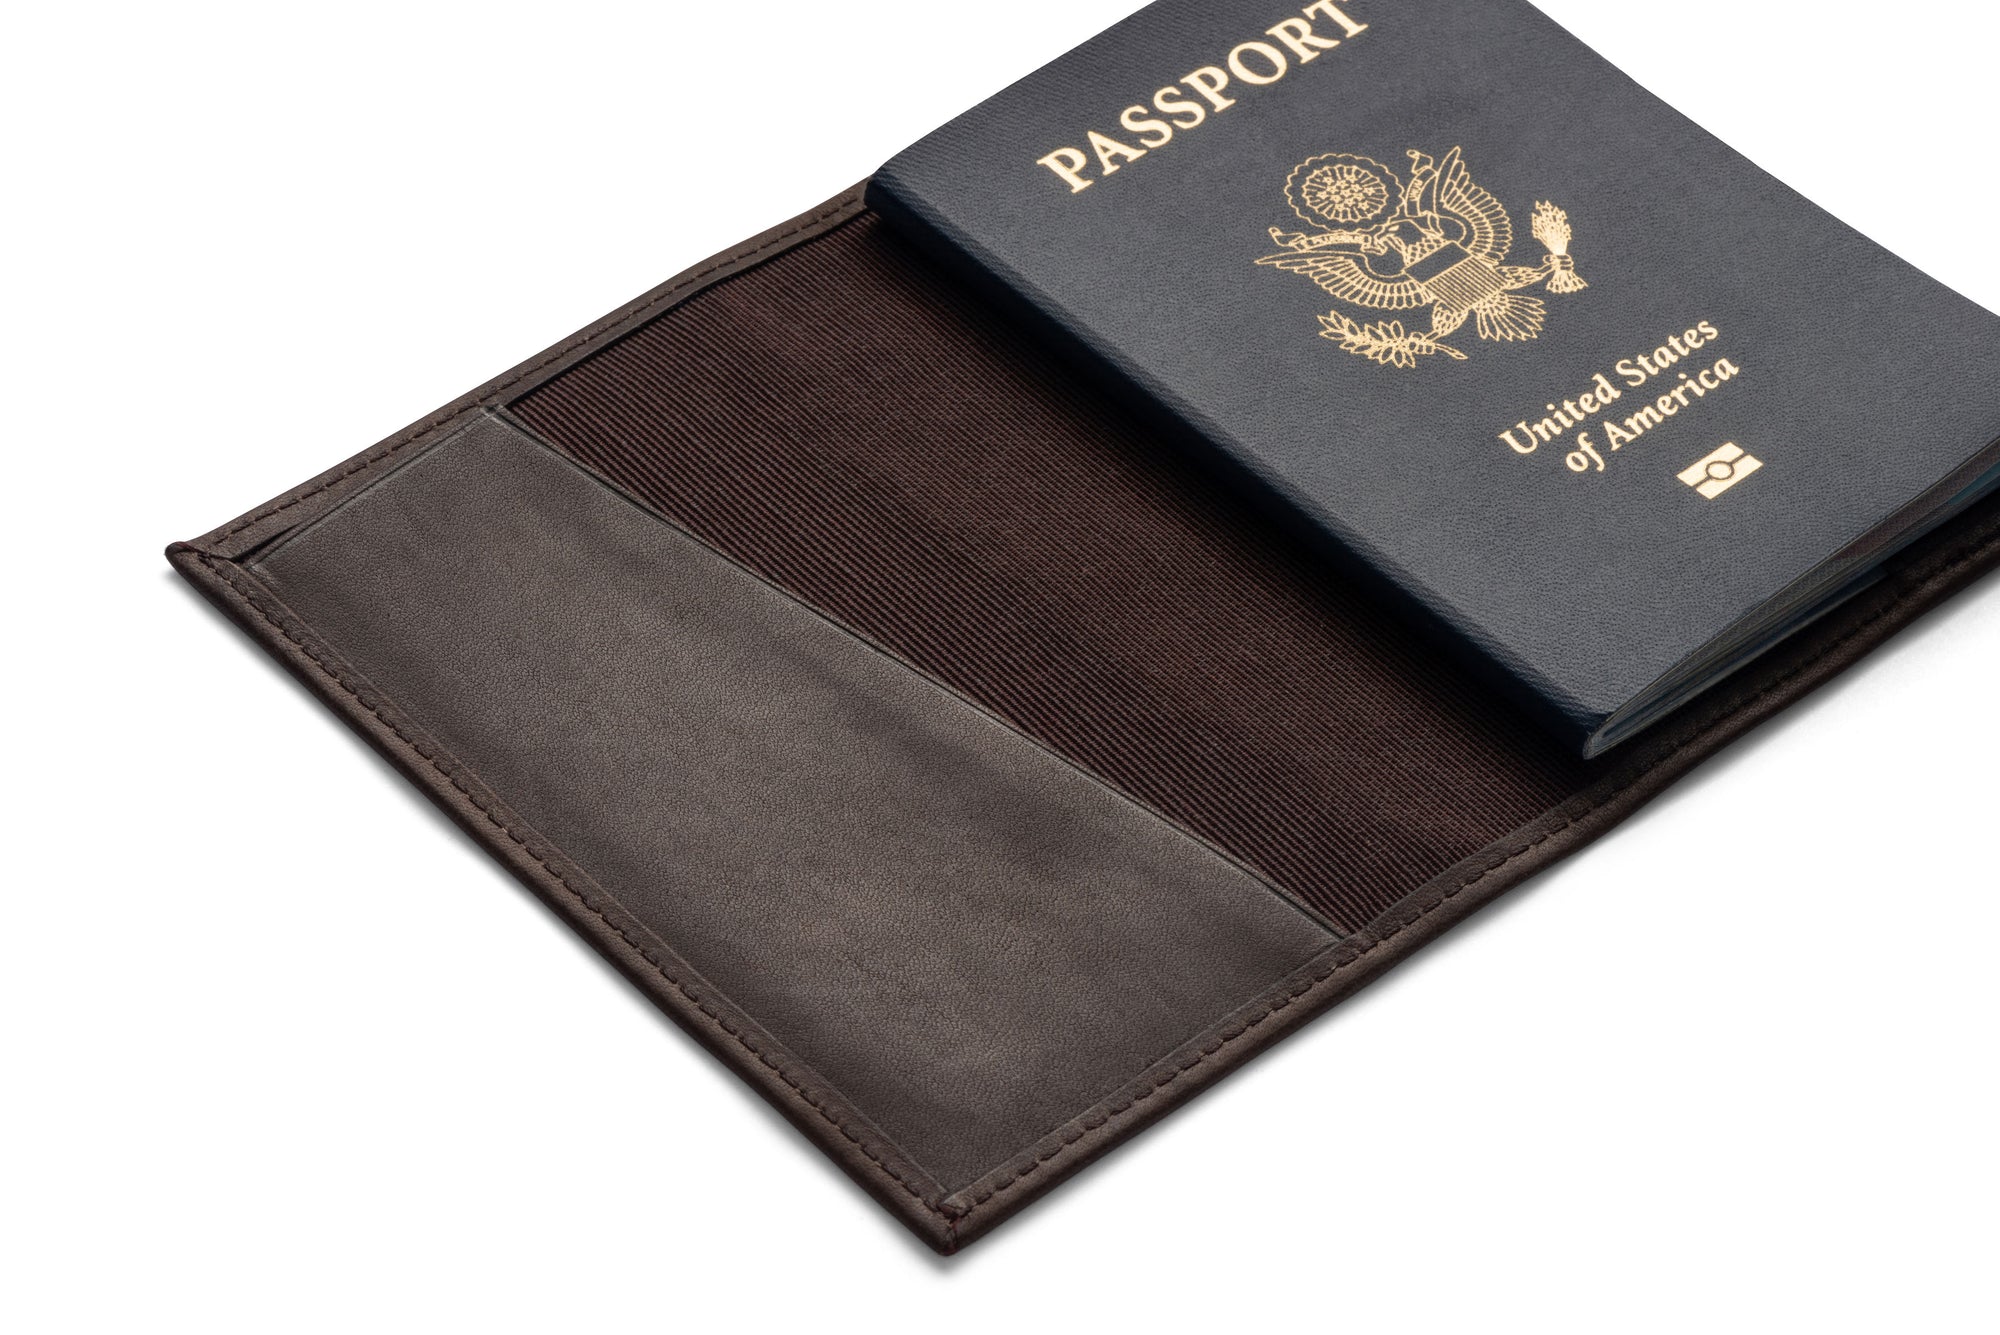 Leather Passport Book Cover In Brown Or Black Made In The Usa Anson